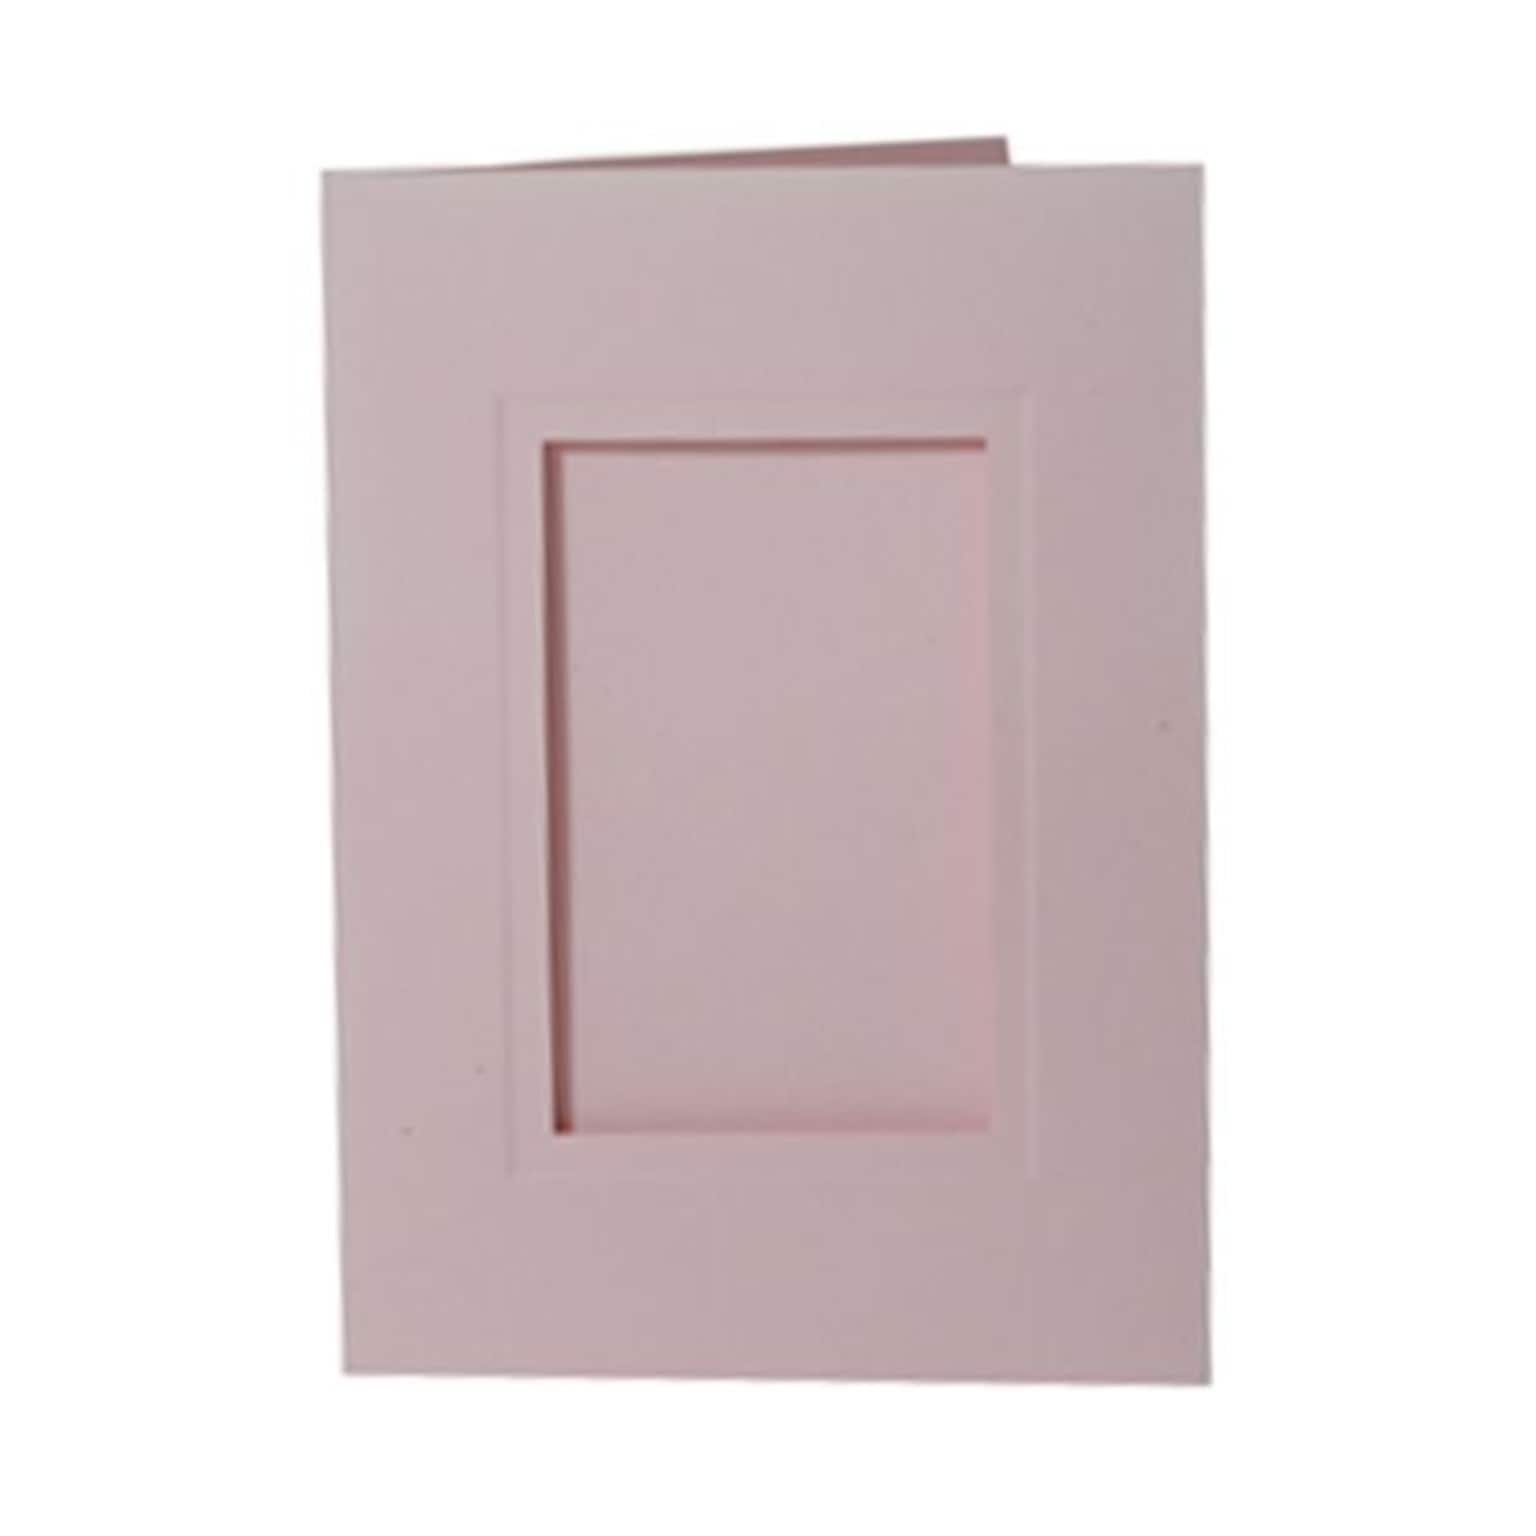 JAM Paper® Foldover Photo Cards, A7 size, 5 x 7, 2.5 x 4 Opening, Baby Pink, 12/pack (1791031)